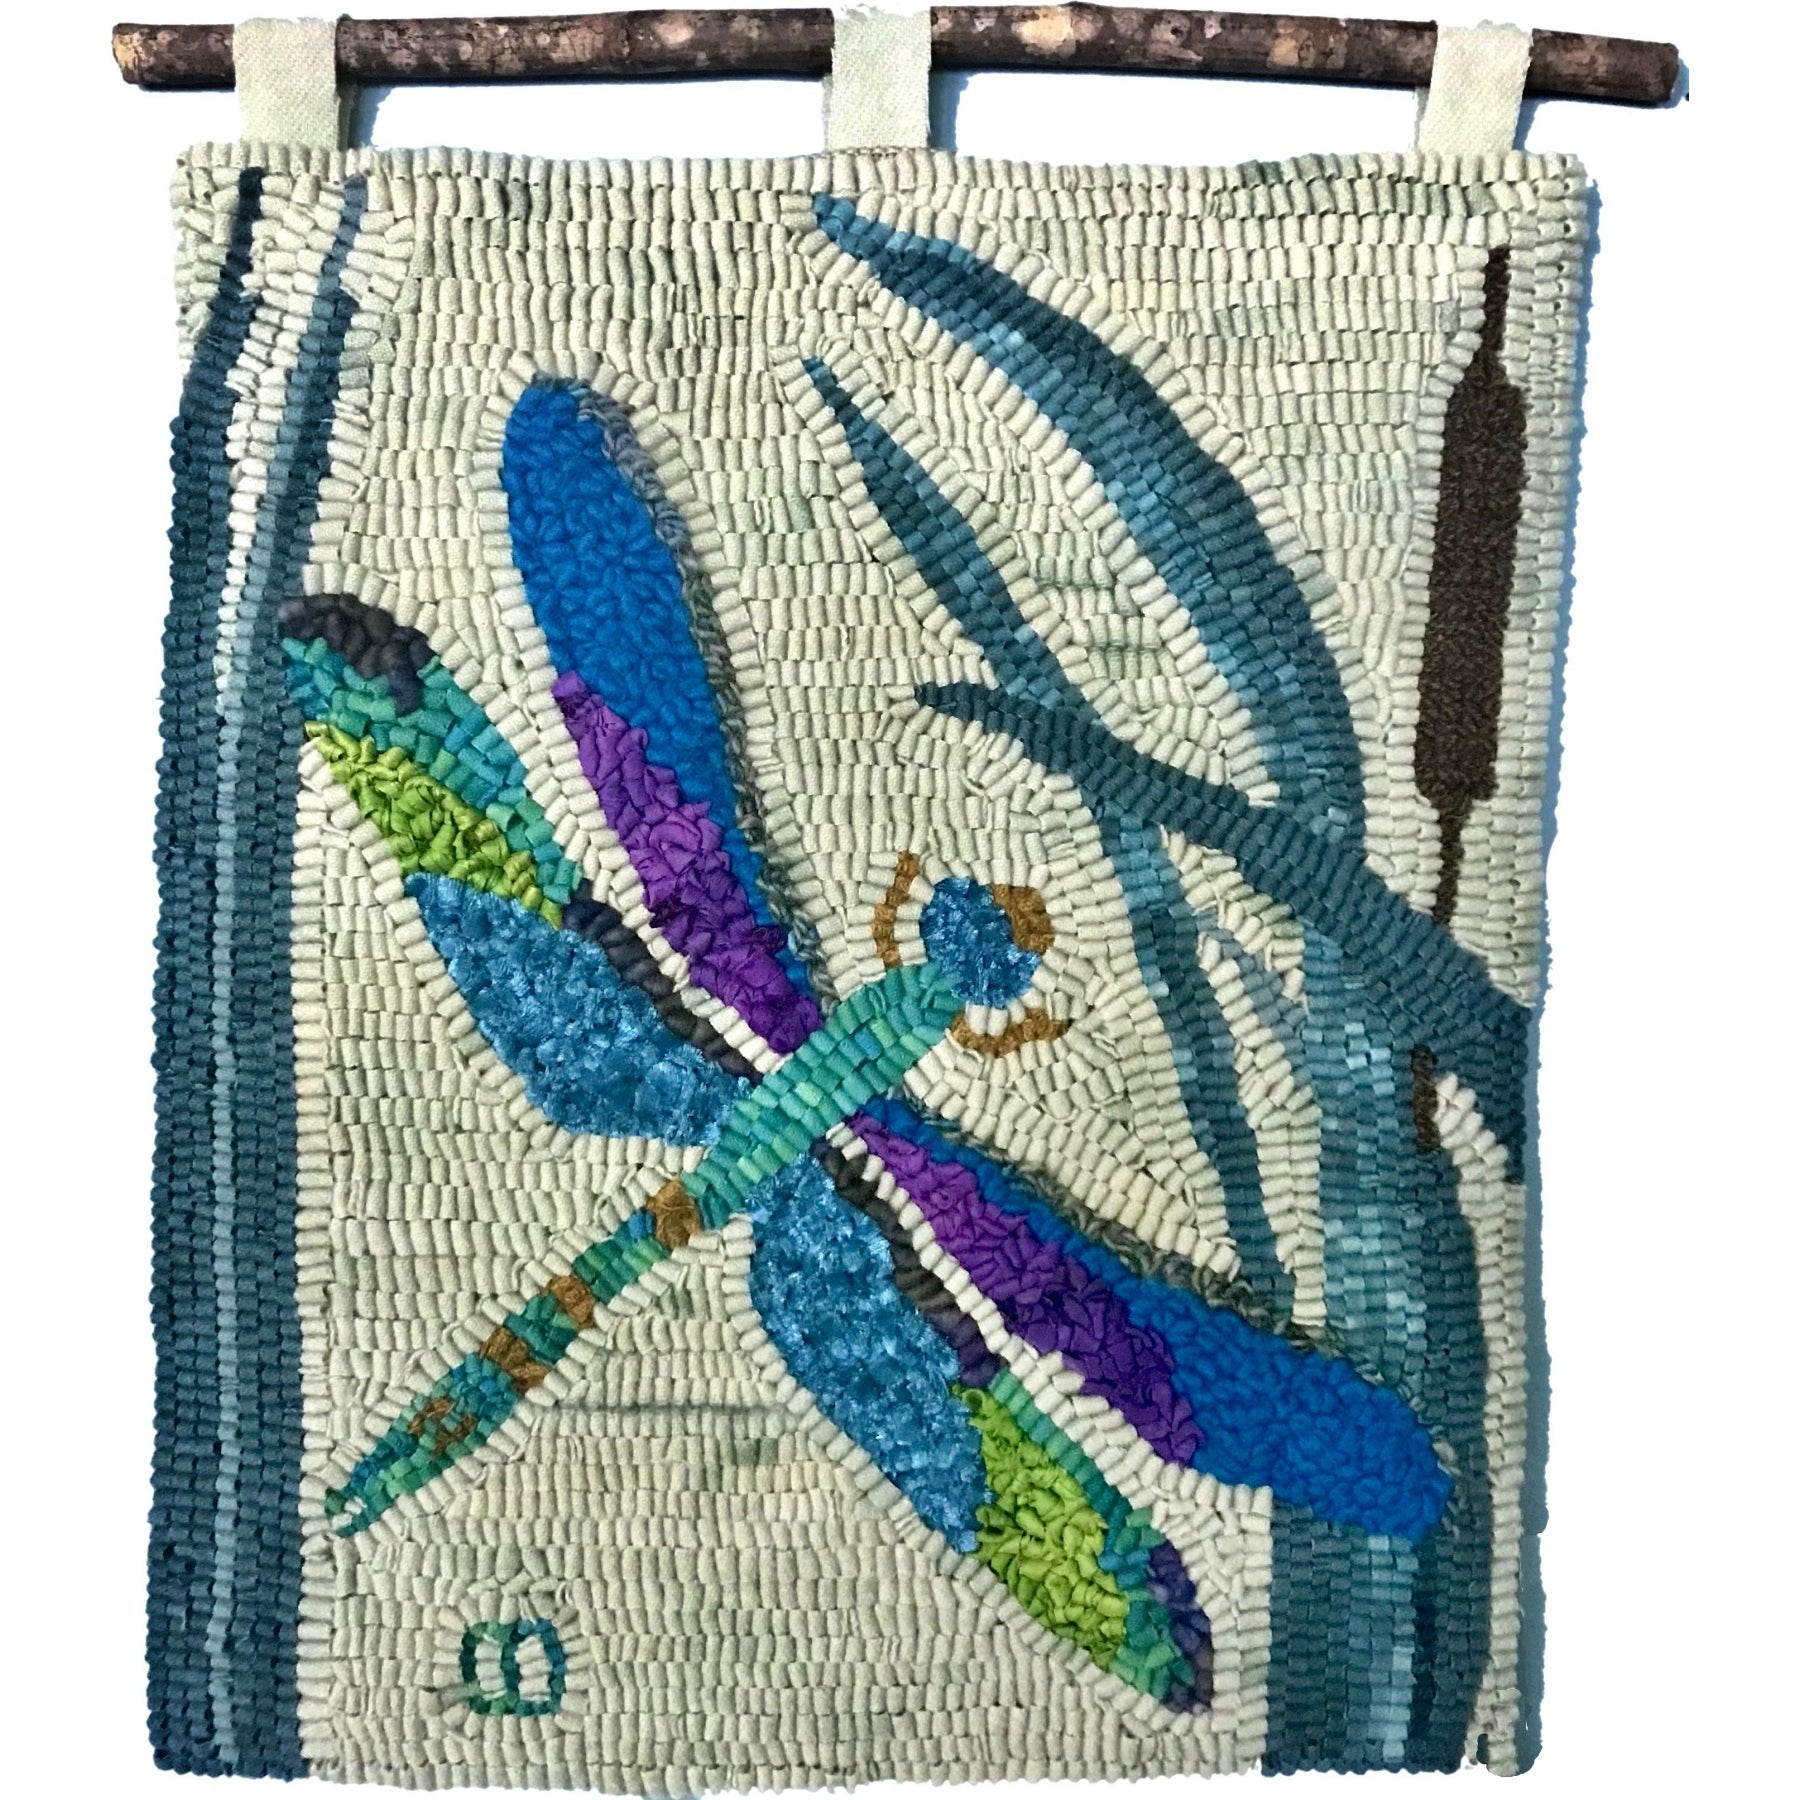 Dragonflies, rug hooked by Cay Dykes